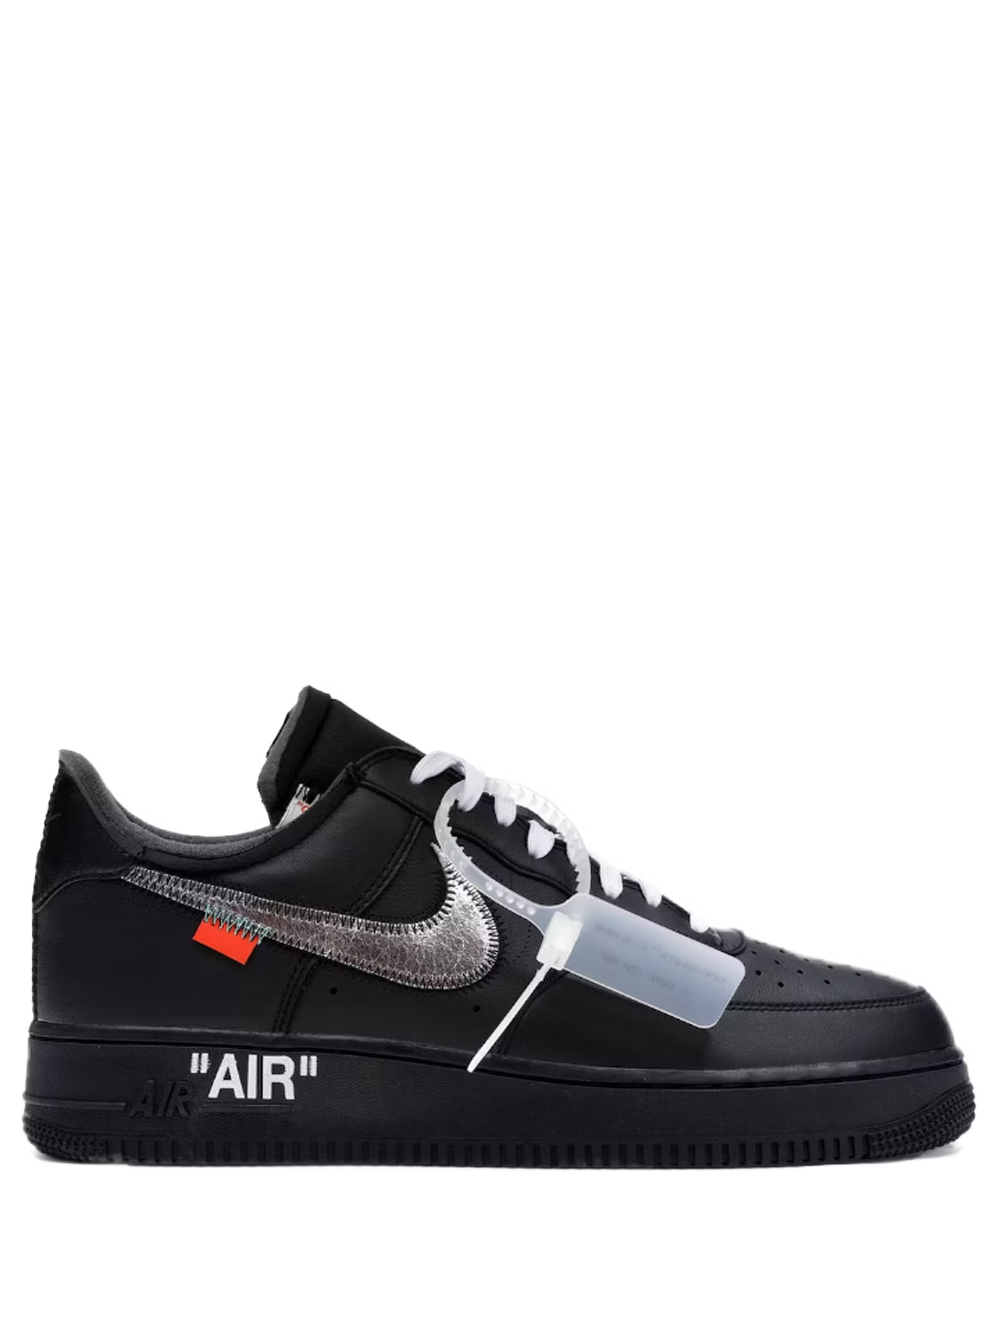 Off‑White x Nike Air Force 1 Low '07 'MoMA' (No Socks) [also worn